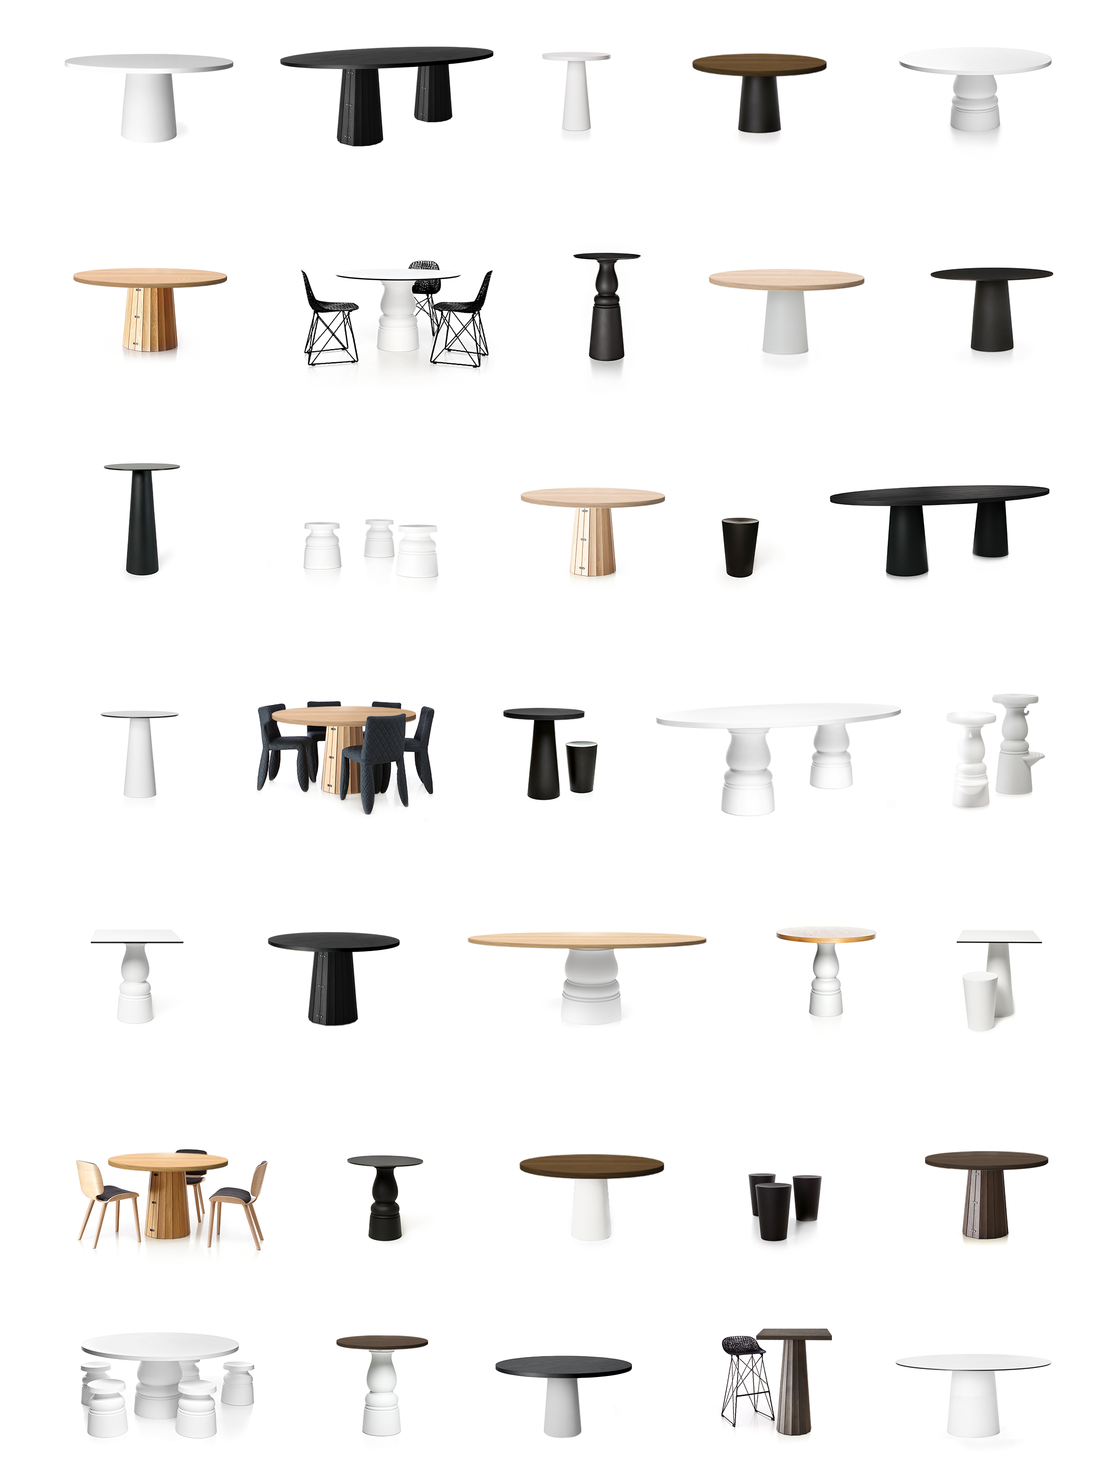 Moooi container table overview 